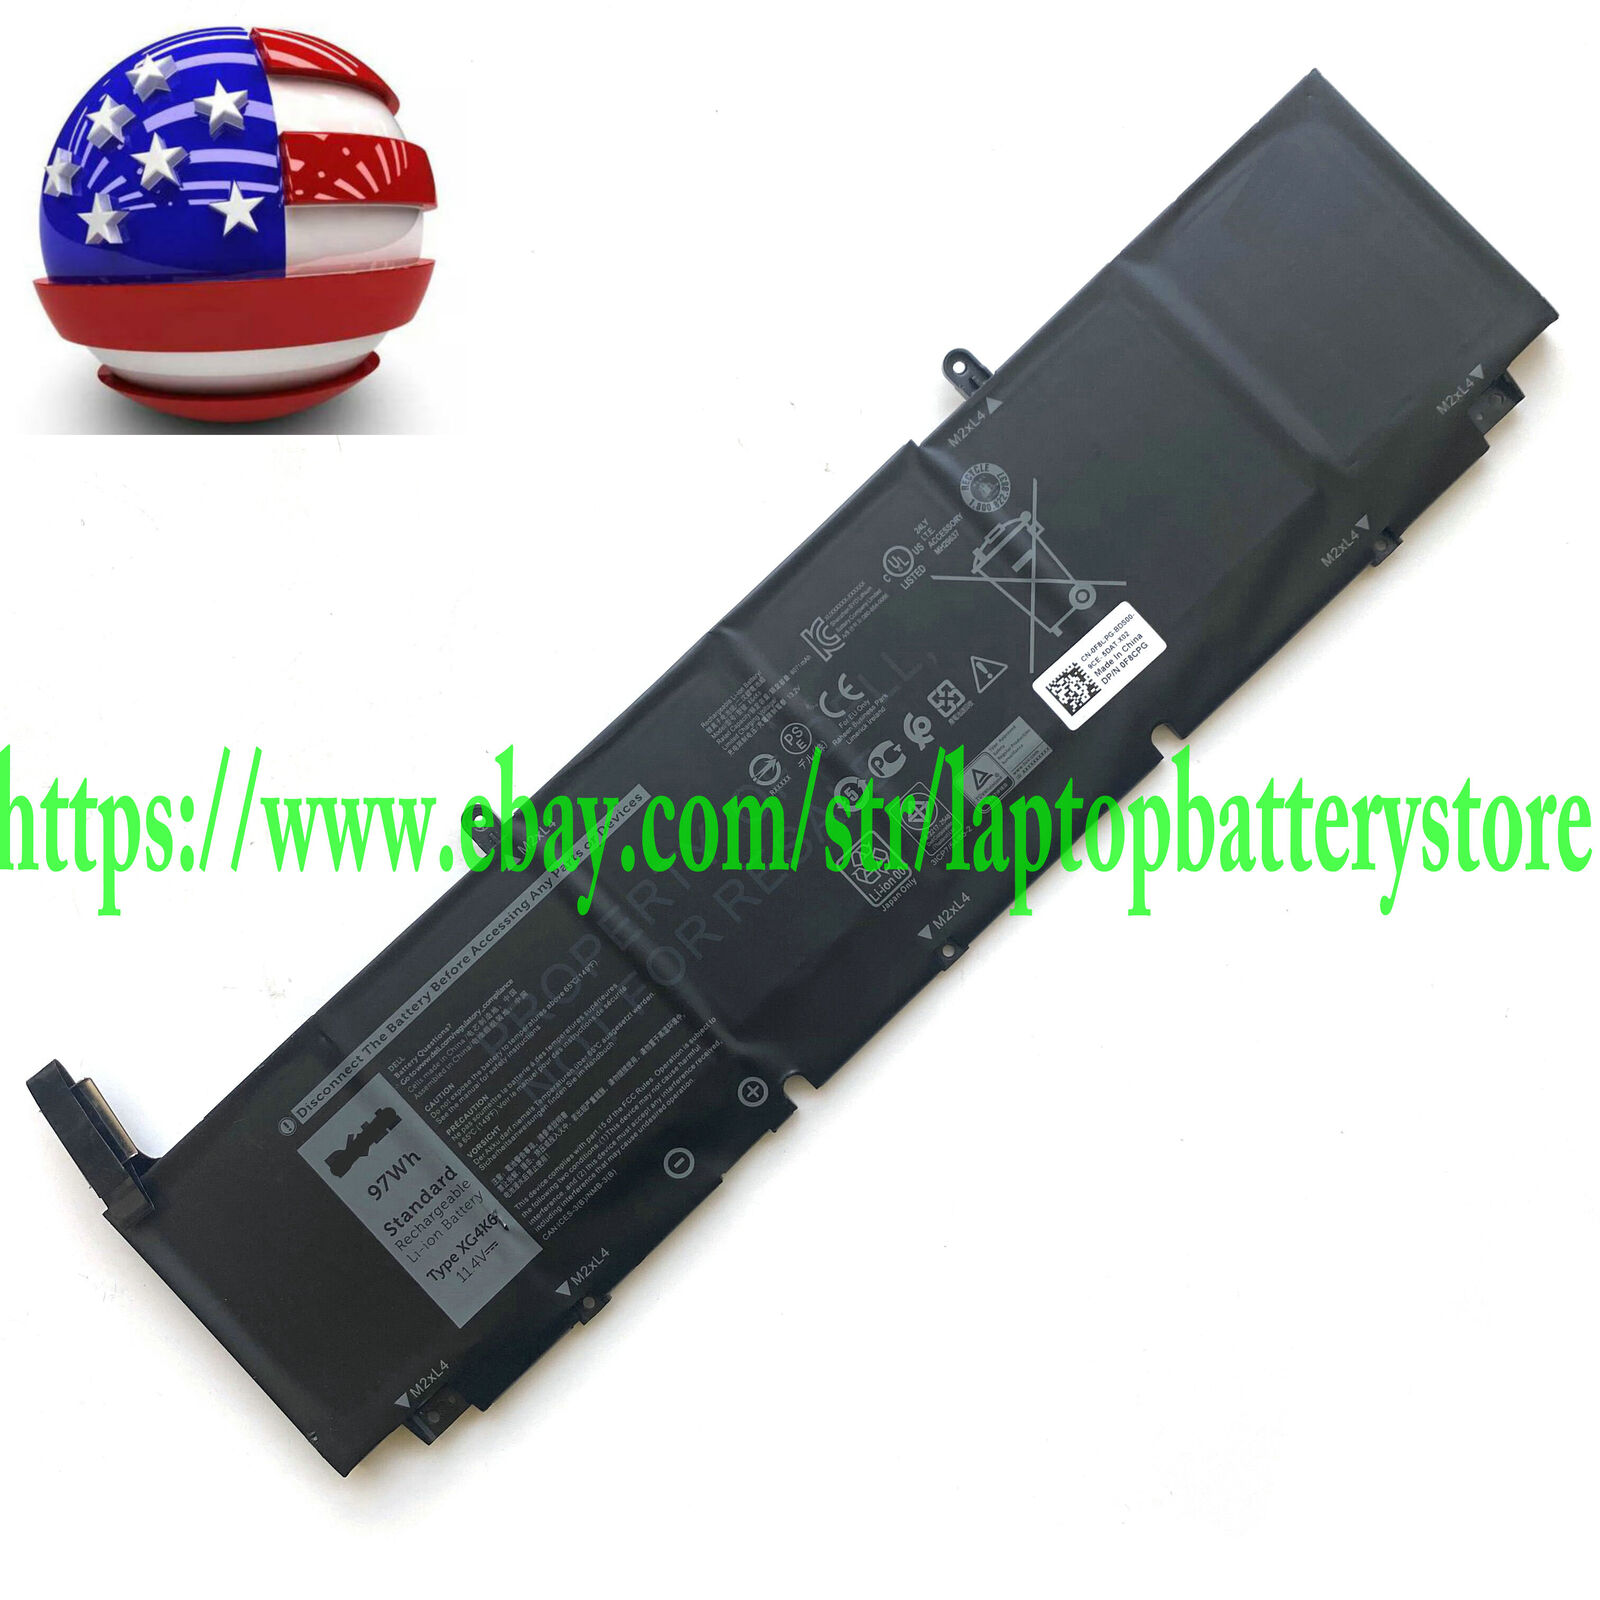 New XG4K6 Built-in Battery For XPS 17 9700 Precision 5750 F8CPG 5XJ6R 01RR3